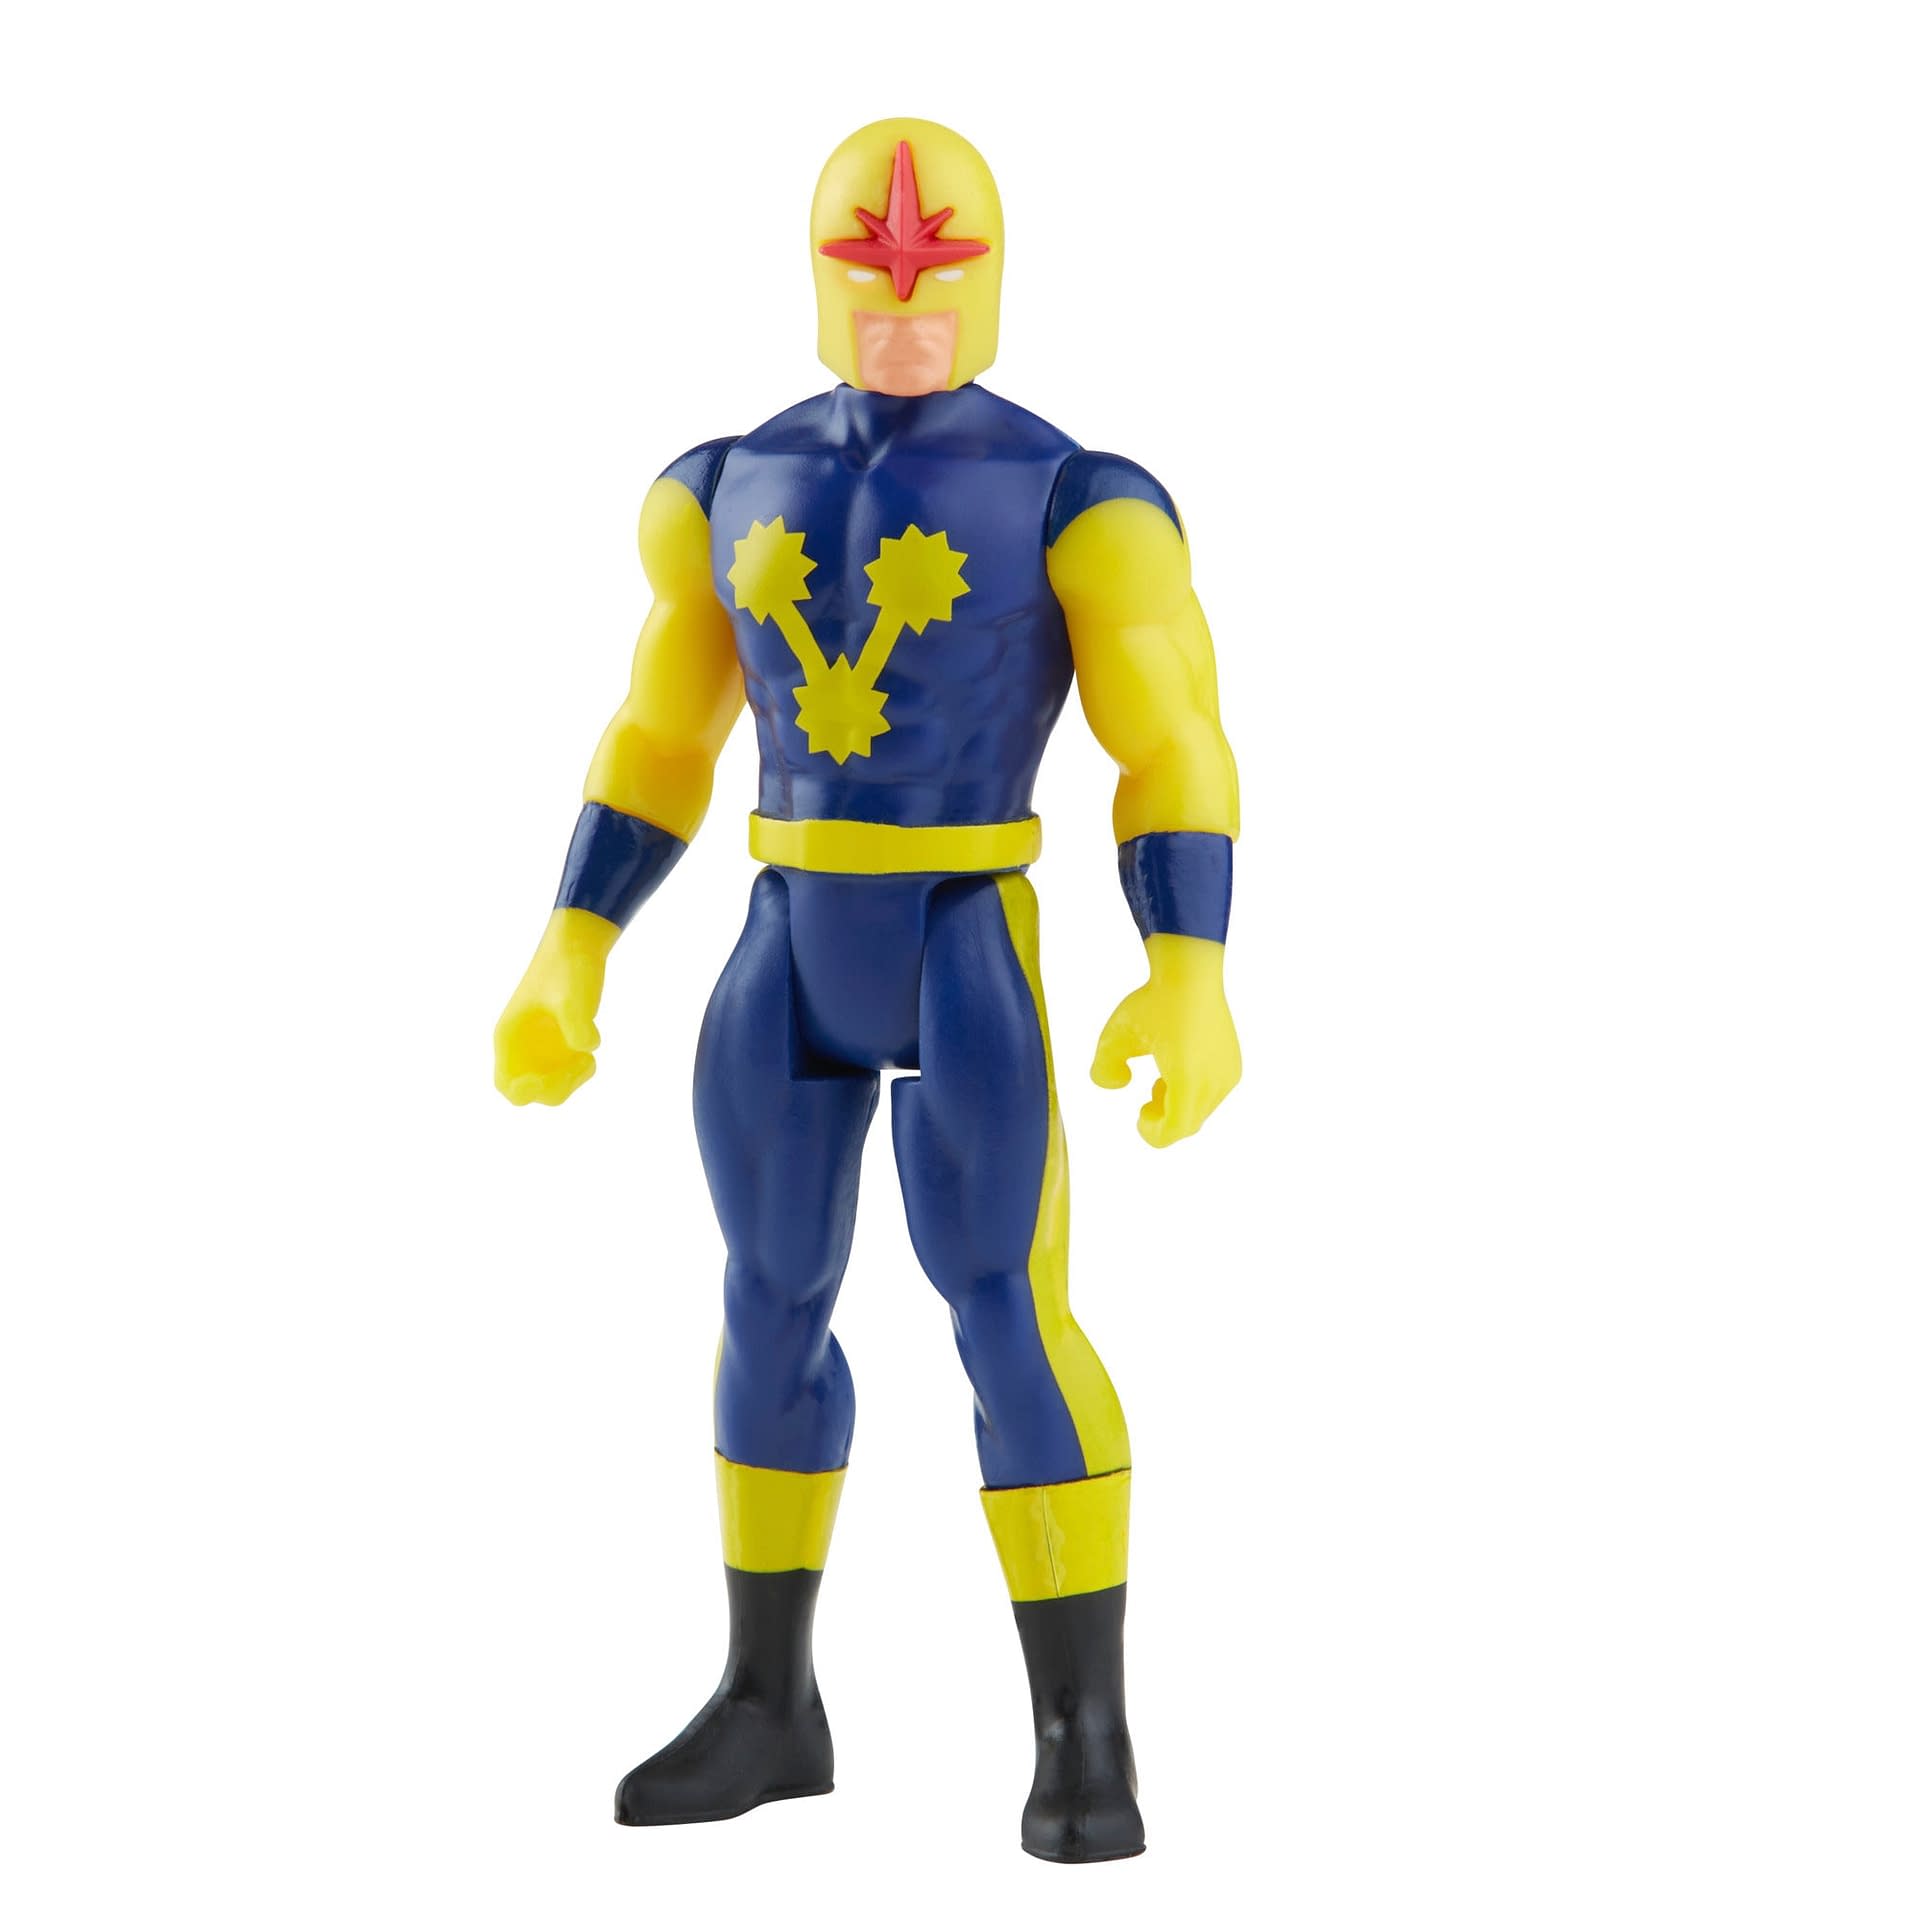 New Marvel Legends Retro Collection Figures Arrive from Hasbro 